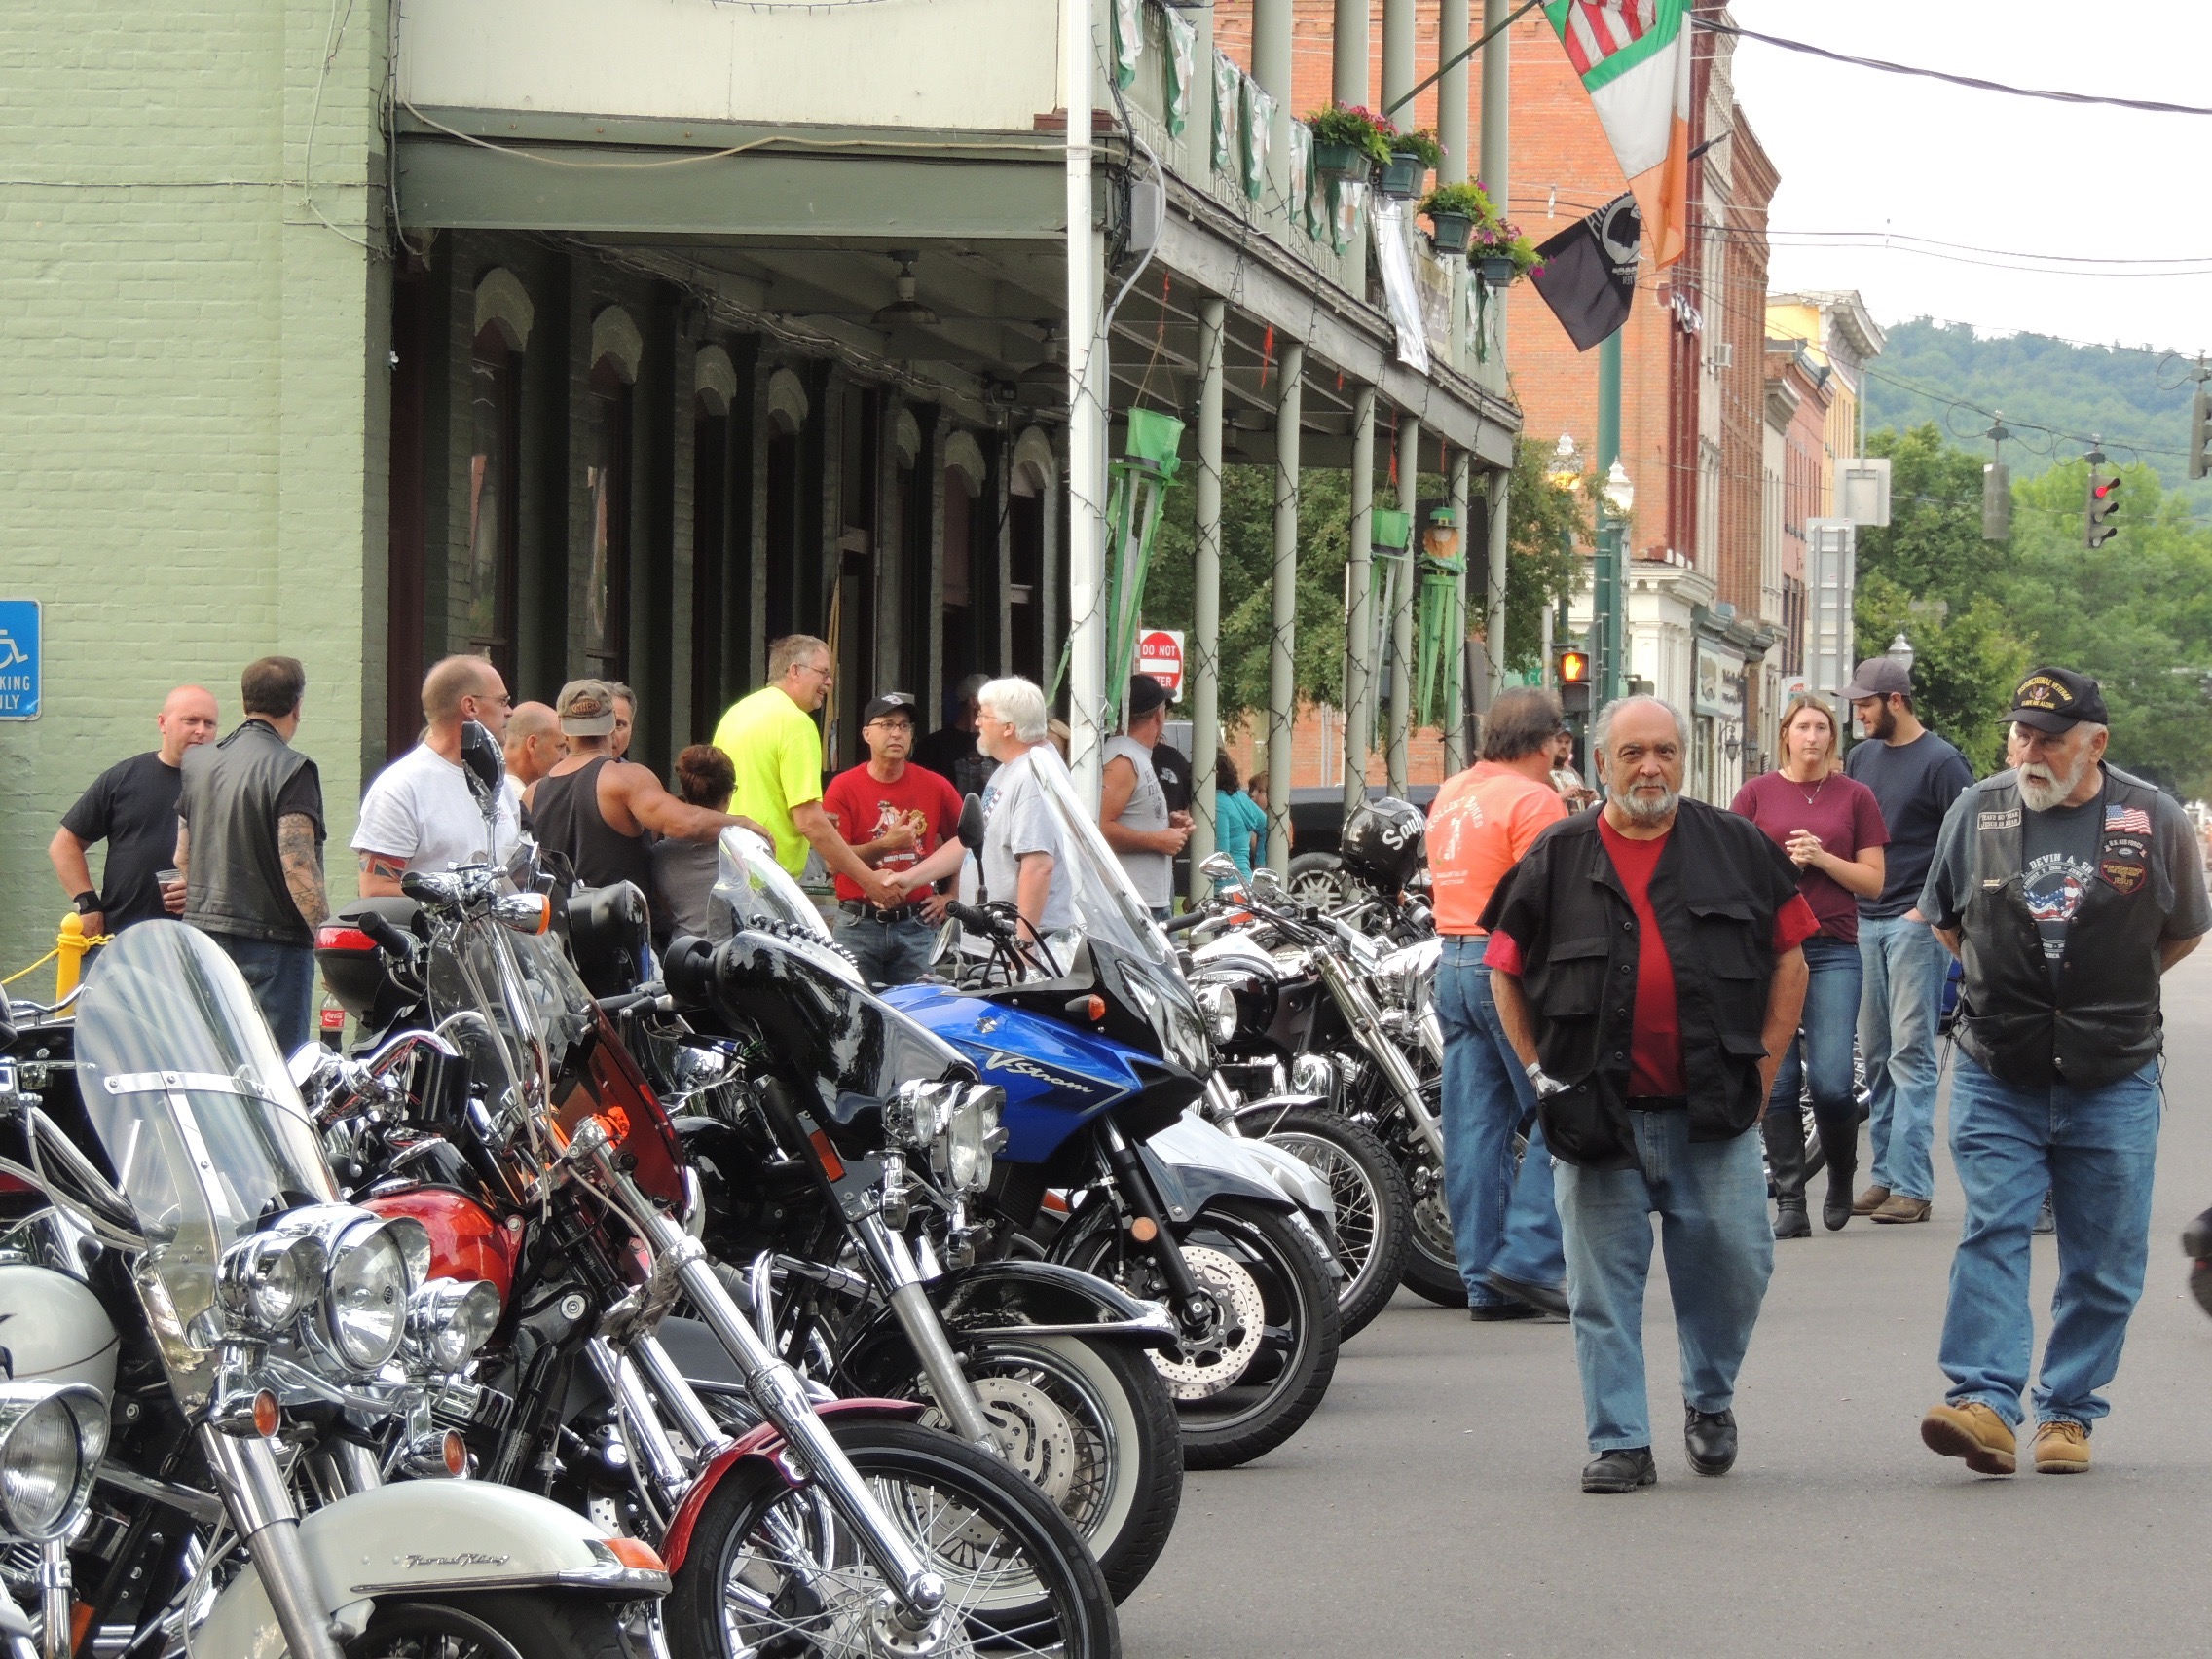 The Cats and Jeff Howell draw large crowd to Bike Night in Owego; Spexxx to perform on Wednesday